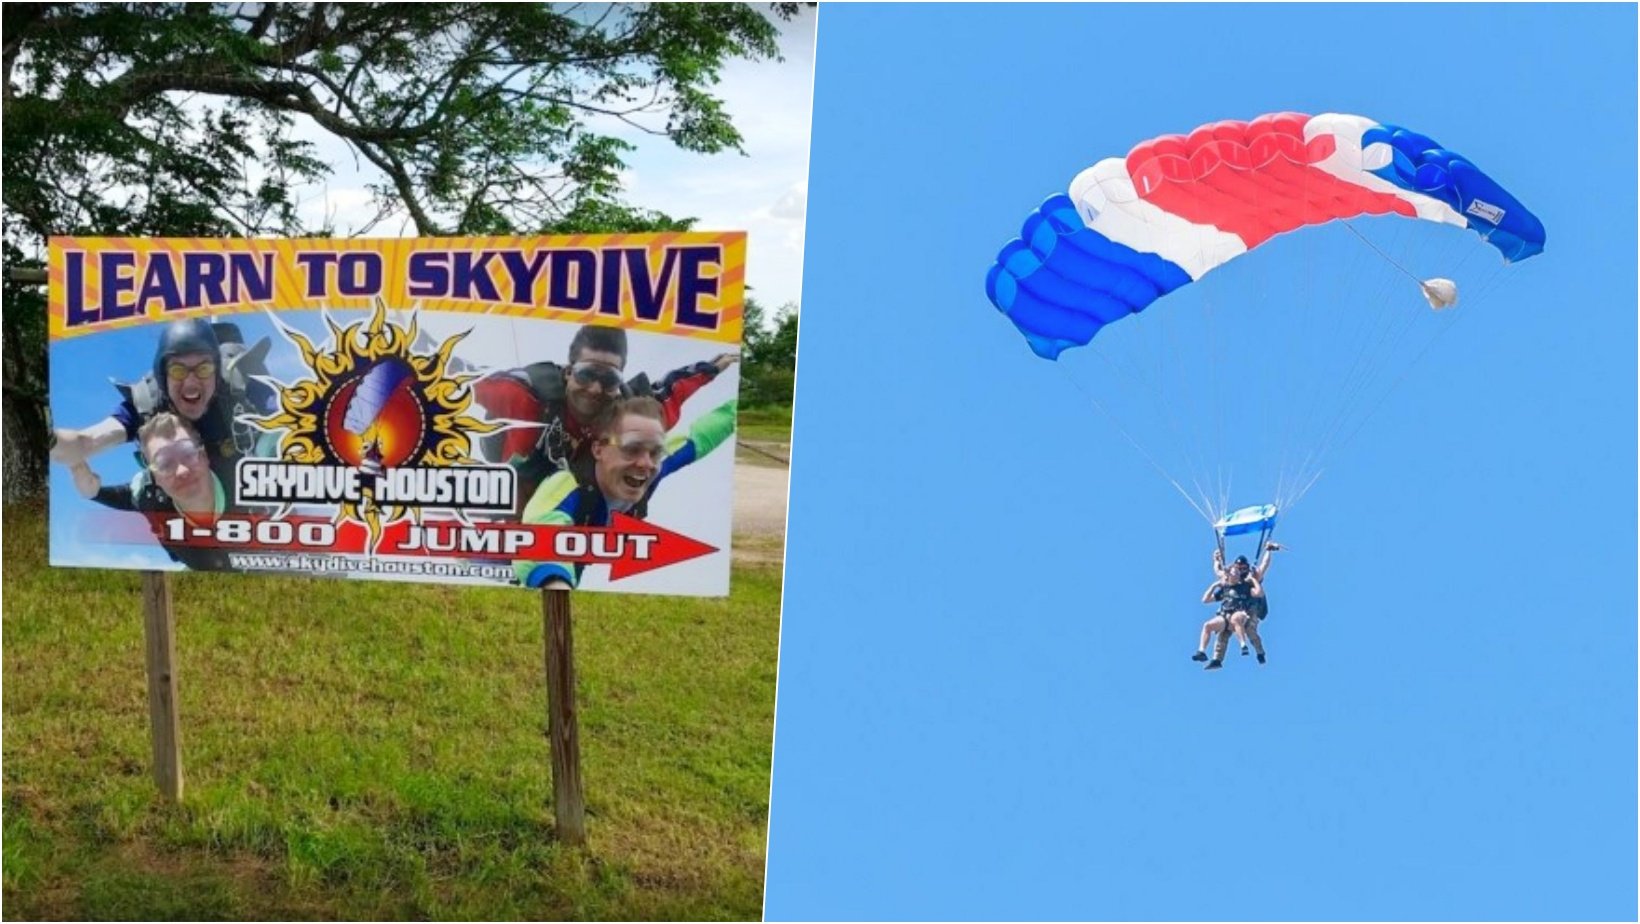 6 facebook cover 11.jpg?resize=1200,630 - Skydiving Instructor Dies In TANDEM JUMP Leaving Student With Injuries After Parachute Fails To Open